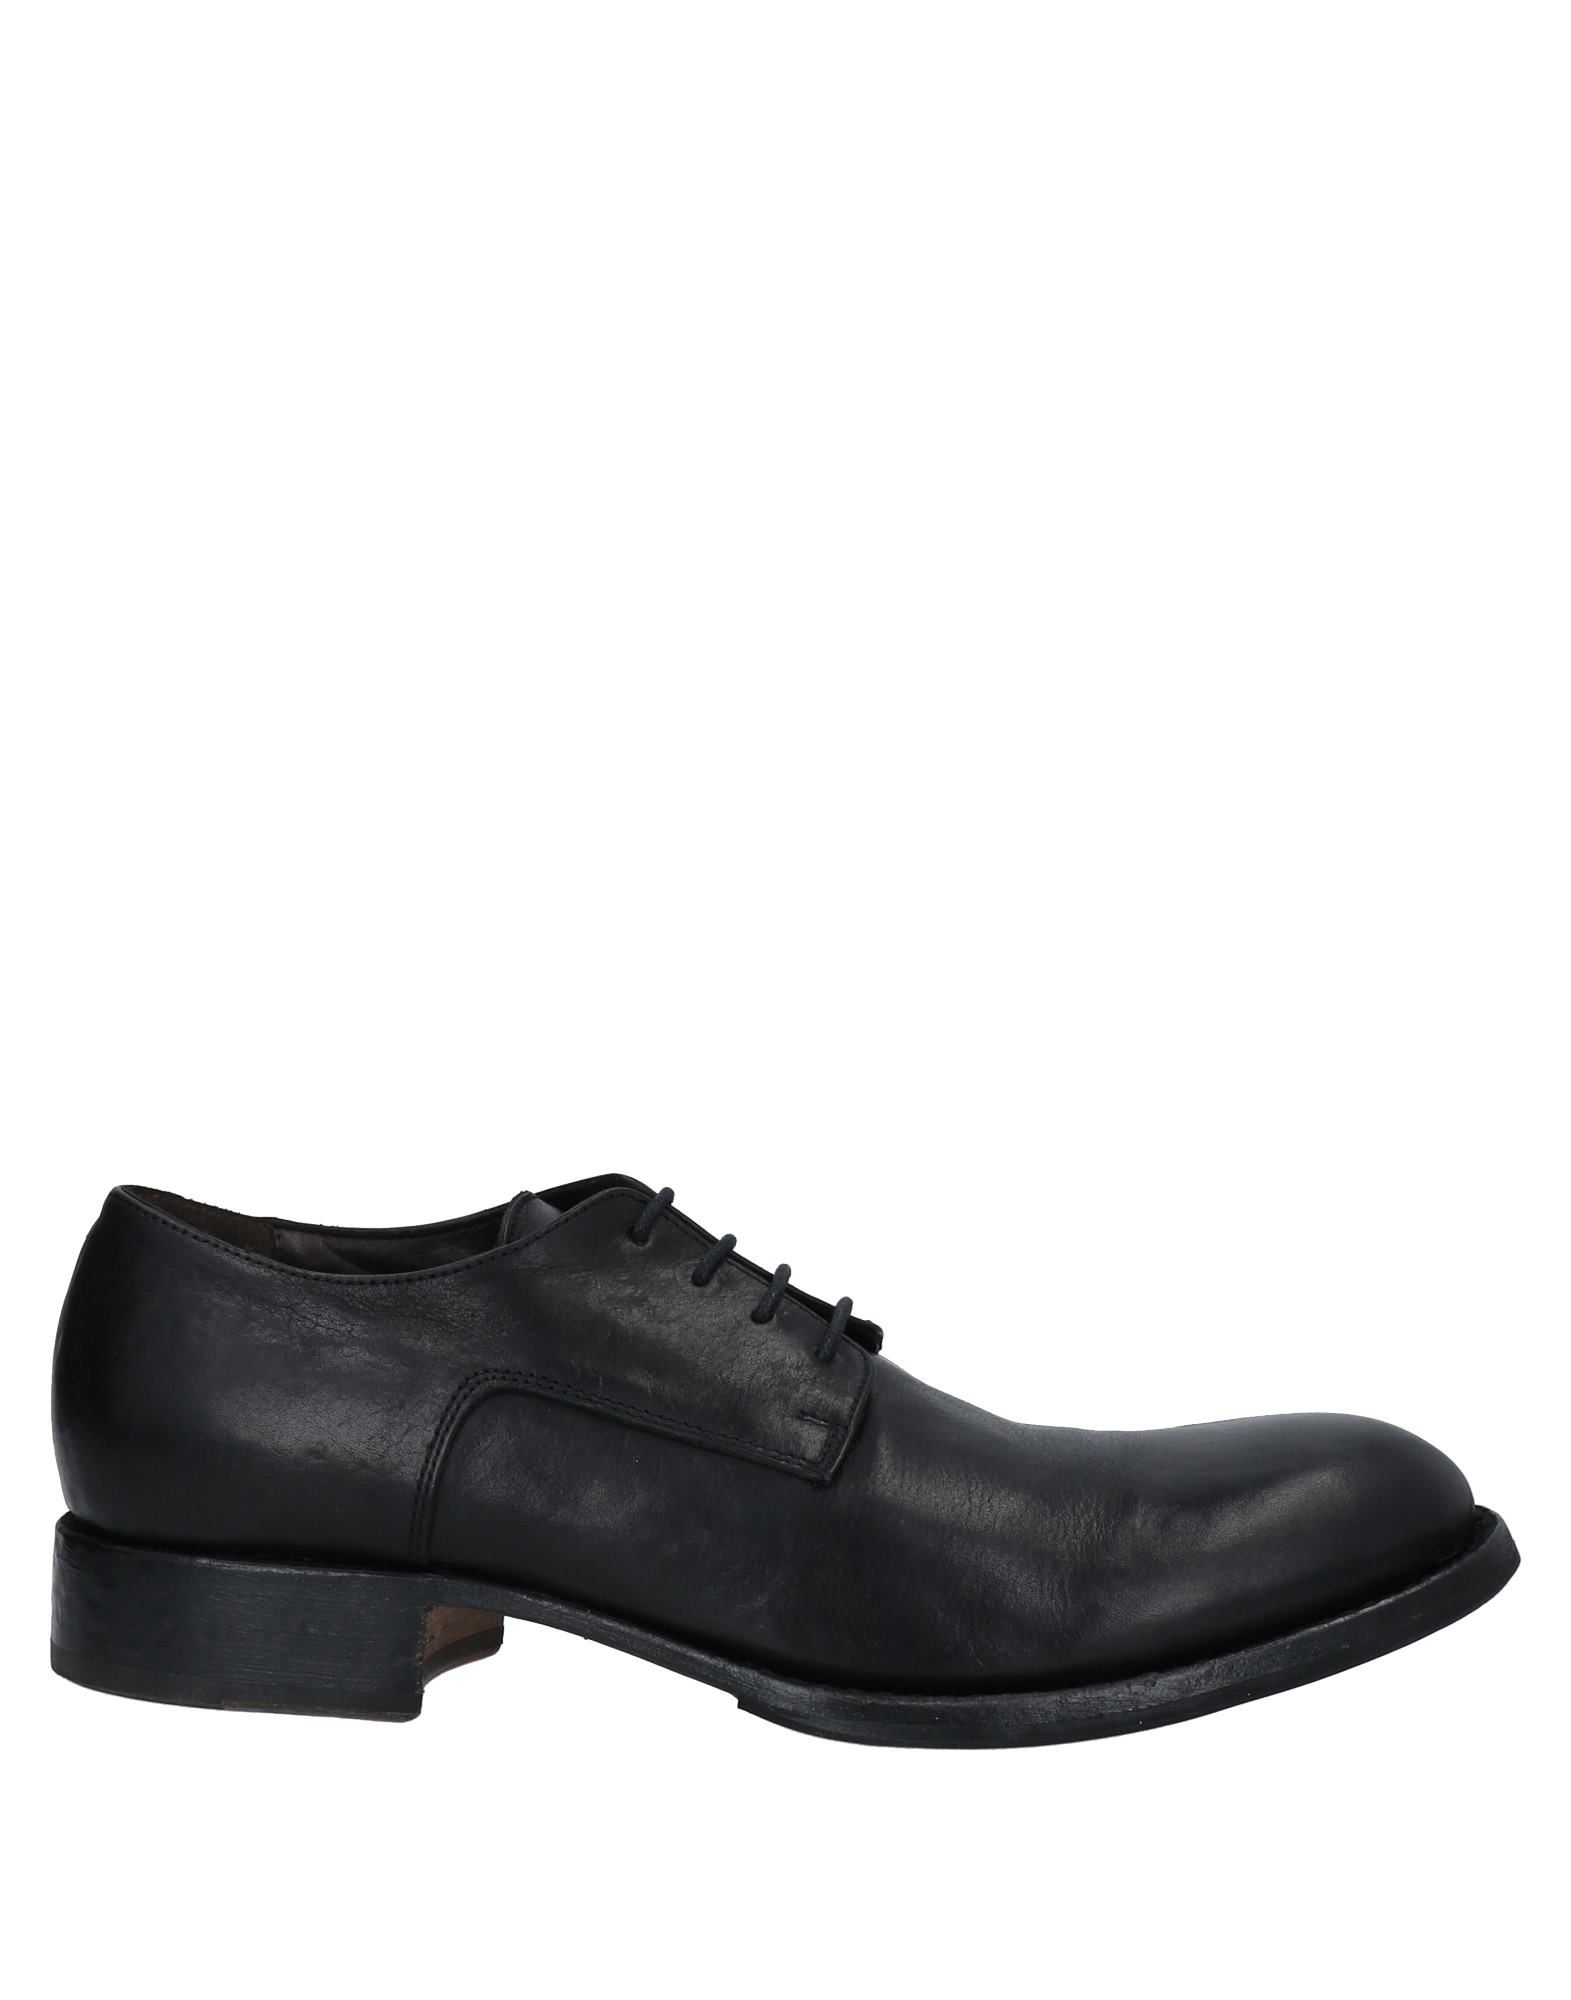 Bcc:'ed Blind Carbon Copied Lace-up Shoes In Black